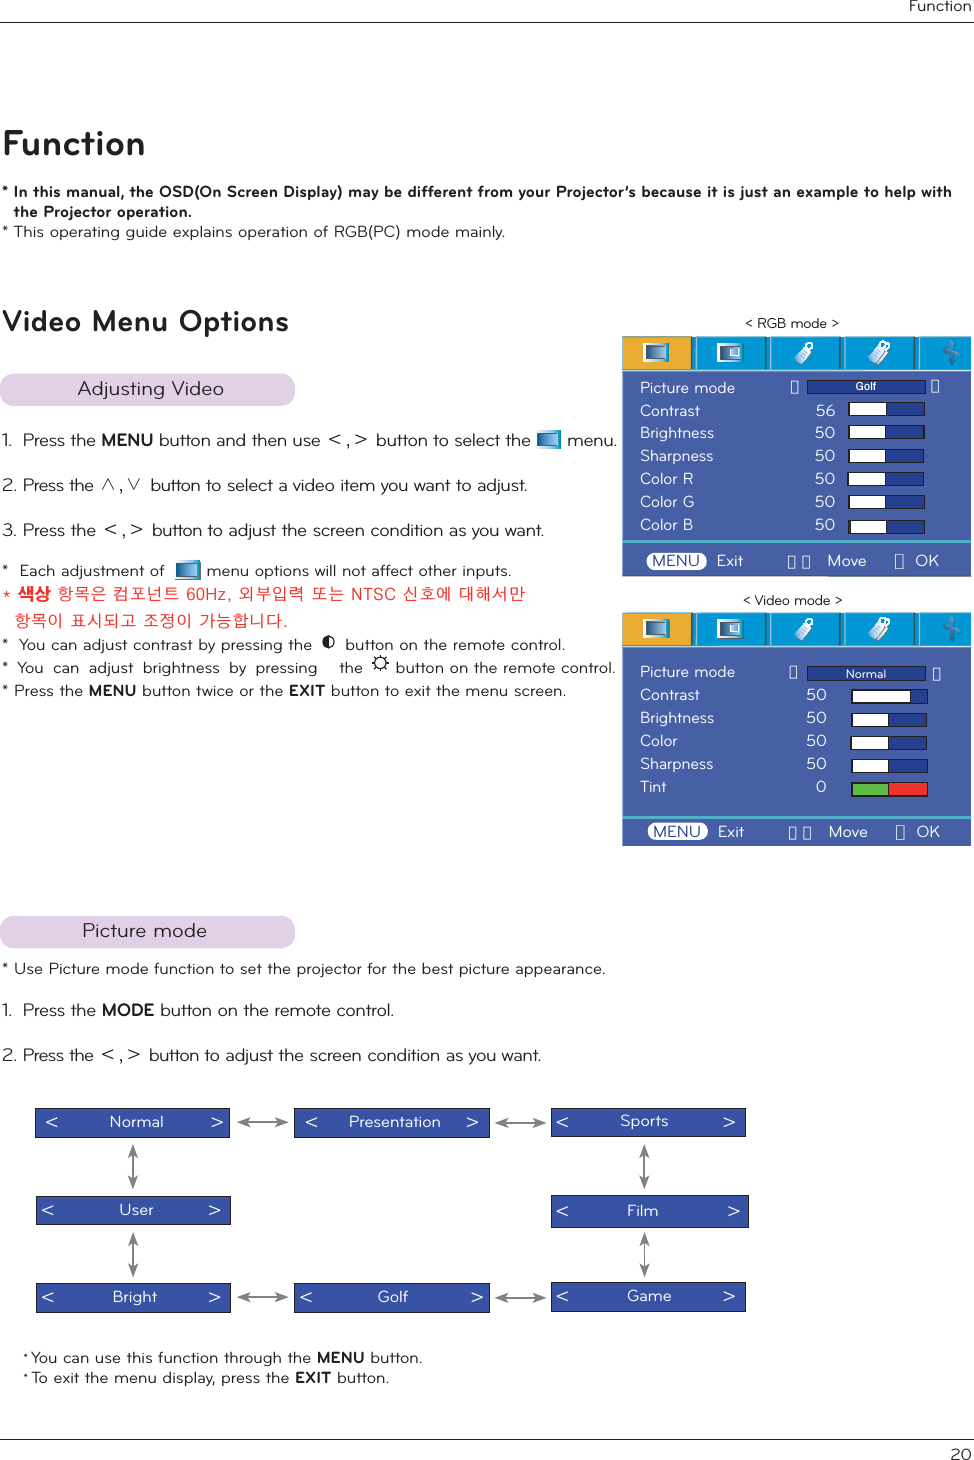 Function20FunctionVideo Menu Options*  In this manual, the OSD(On Screen Display) may be different from your Projector’s because it is just an example to help with the Projector operation.* This operating guide explains operation of RGB(PC) mode mainly.1. Press the MENU button and then use 䰽/䰿 button to select the menu.2. Press the 䯁/䯂#button to select a video item you want to adjust.3. Press the 䰽/䰿 button to adjust the screen condition as you want.&lt; RGB mode &gt;&lt; Video mode &gt;*  Each adjustment of  menu options will not affect other inputs. -#△▫#㘗᭓⟪#⾞㒖ᆶ㍢#93K}/#✢Ḫ⠯ᣏ#ᚺጾ#QWVF#⎊㛢♺#Ꭺ㘞⇆᩶###㘗᭓⠞#㔆⎆ᓂඊ#⤚⢿⠞#ಪፏ㘓፲ᎎ1*  You can adjust contrast by pressing the  #button on the remote control.* You can adjust brightness by pressing  the  button on the remote control.* Press the MENU button twice or the EXIT button to exit the menu screen.Adjusting Video 1. Press the MODE button on the remote control.2. Press the 䰽/䰿 button to adjust the screen condition as you want.Picture mode* Use Picture mode function to set the projector for the best picture appearance.* You can use this function through the MENU button.* To exit the menu display, press the EXIT button.Picture  mode              Contrast     56Brightness     50Sharpness     50Color R     50Color G     50Color B     50 JroiMENU   Exit        ＜＞  Move     󱡧 OKPicture  mode              Contrast               50Brightness            50Color                    50Sharpness            50Tint                                0NormalMENU   Exit        ＜＞  Move     󱡧 OK 䰽#######Normal        䰿  䰽     Presentation    䰿 䰽#######Sports     䰿䰽#########User          䰿 䰽########Film            䰿䰽########Bright     䰿 䰽#########Golf         䰿䰽          Game         䰿 ＞＞＜＜